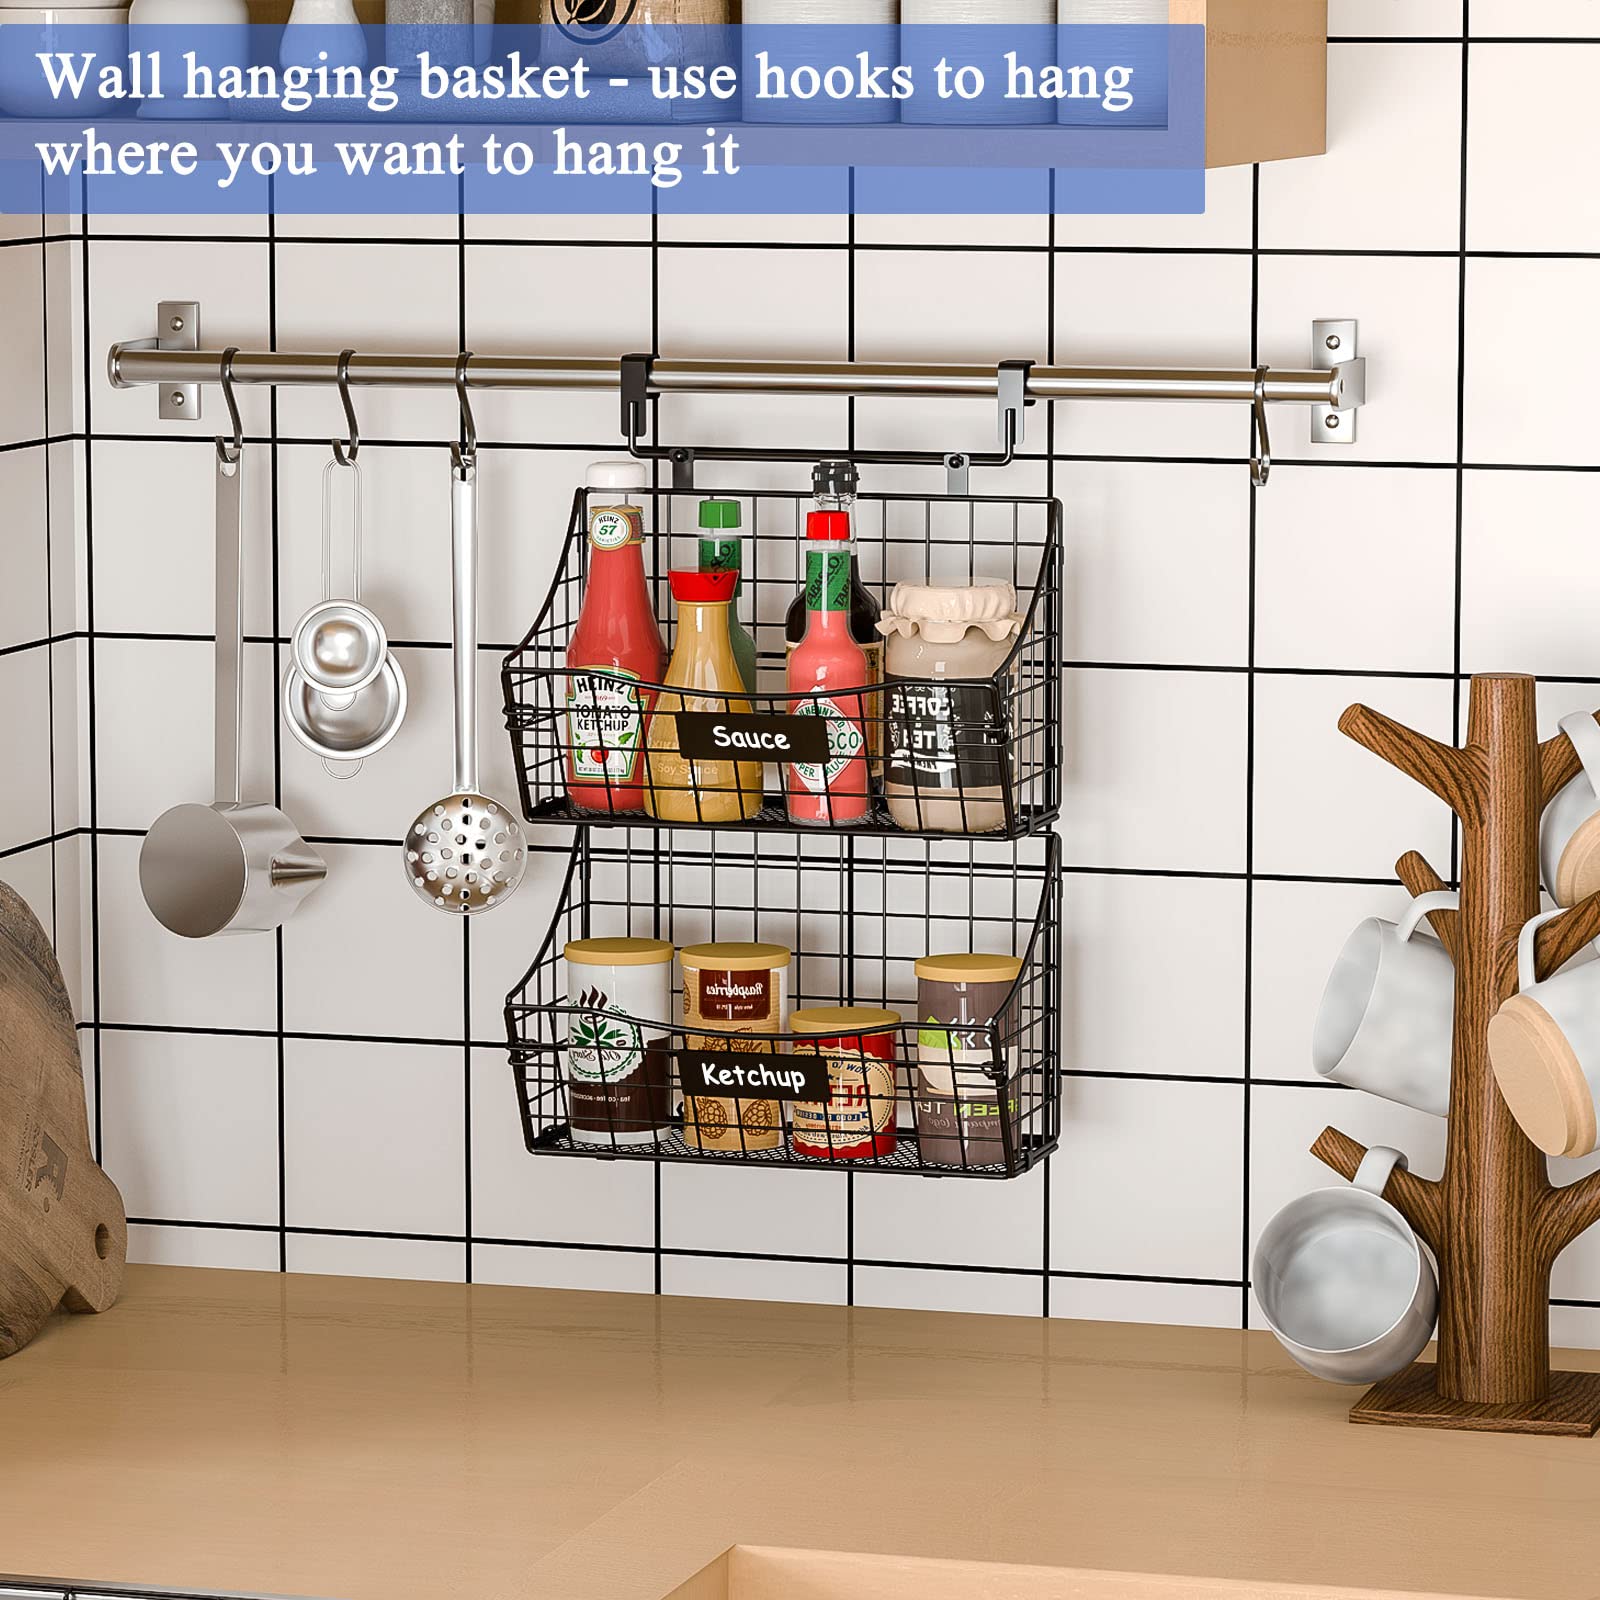 3 Pack Over Cabinet Door Organizer - Stackable Metal Storage Baskets with 3 Short/Mid/Long Wall Hooks+Name Plate+5 S Hooks for Kitchen Bathroom Laundry - Hanging Cabinet Door Organizer, Shampoo Spice